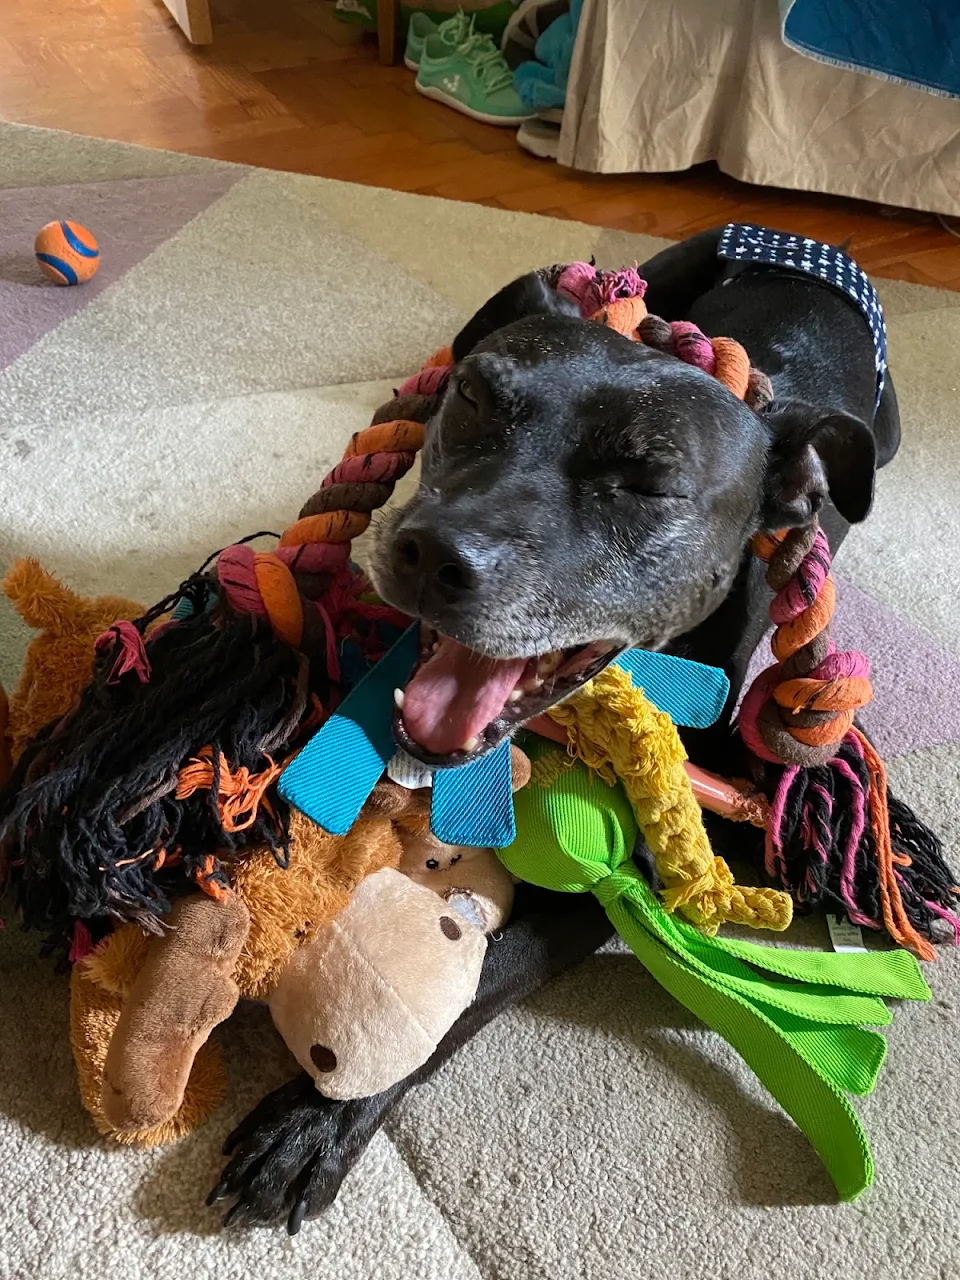 Happy National Dog day. This is Jasper, celebrating with a few toys